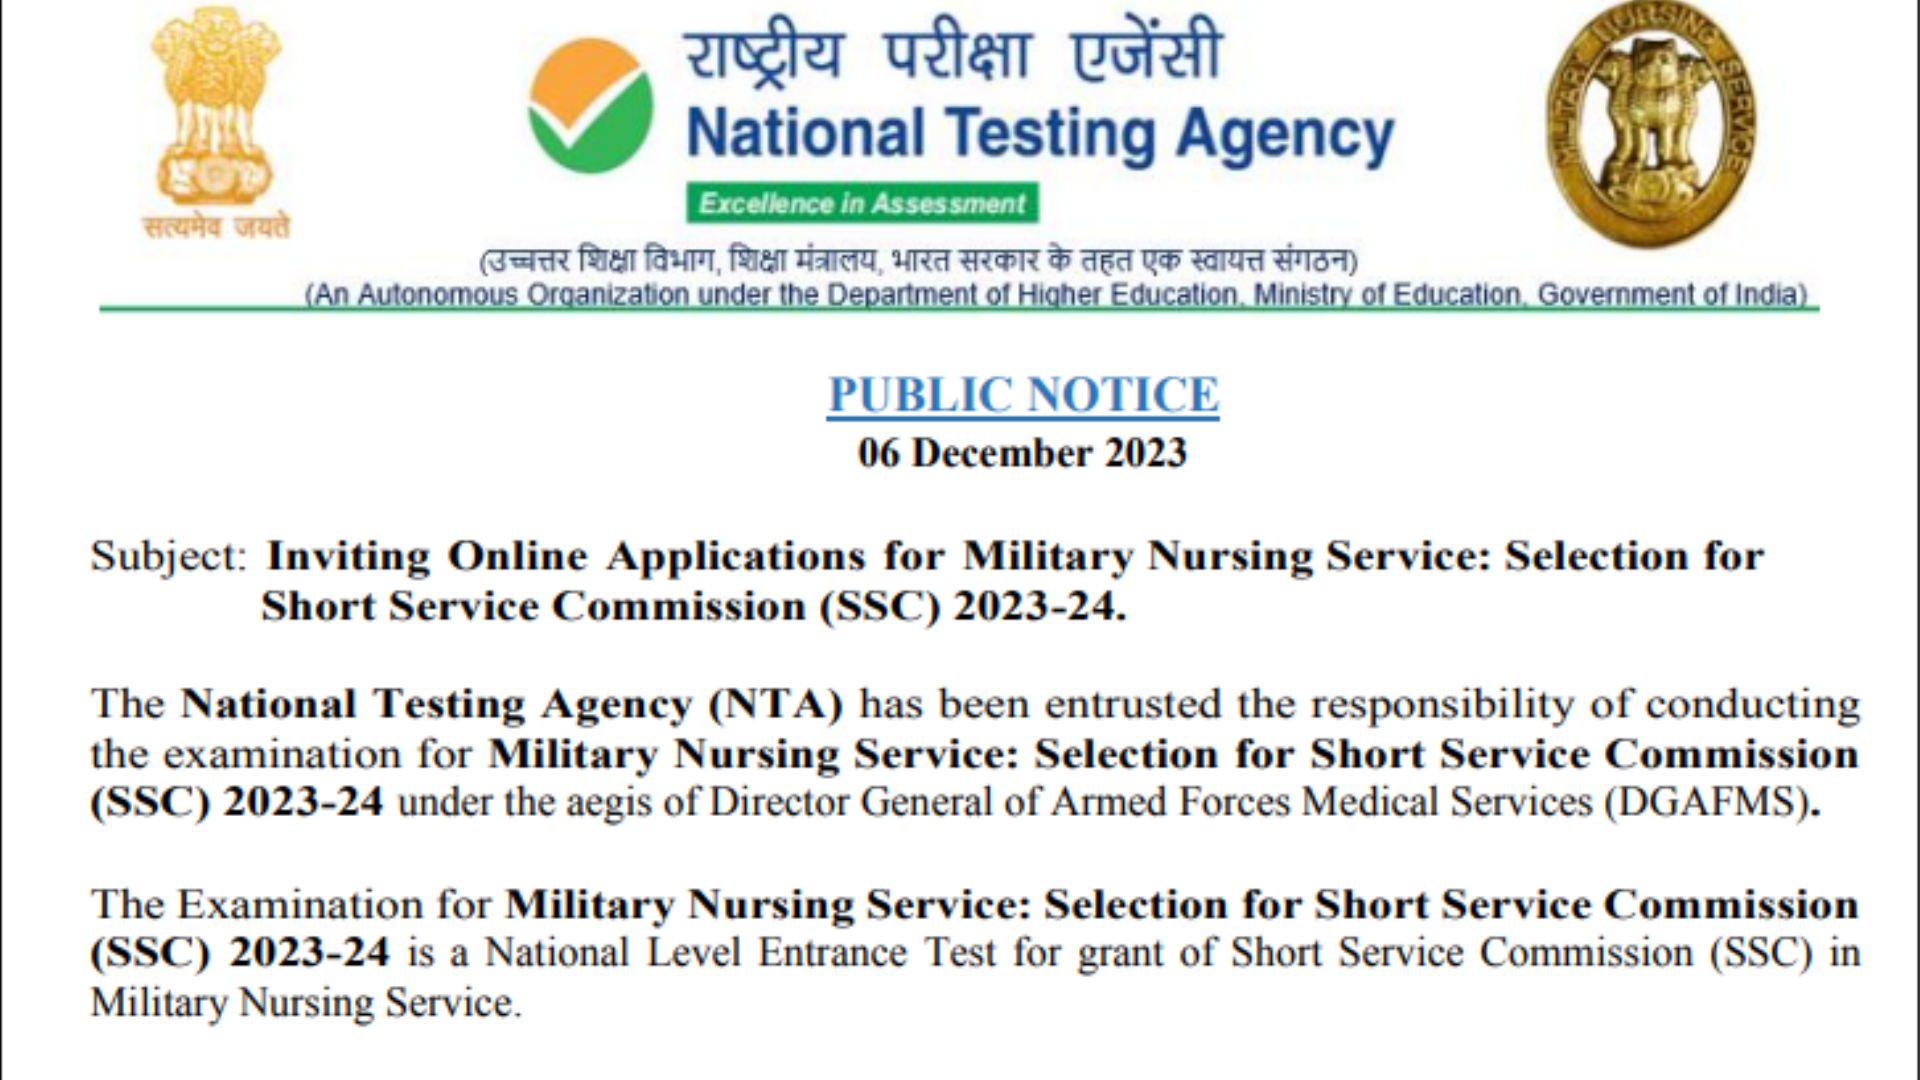 Army Military Nursing Service (MNS) Recruitment 2023 Notification Out, Apply Online